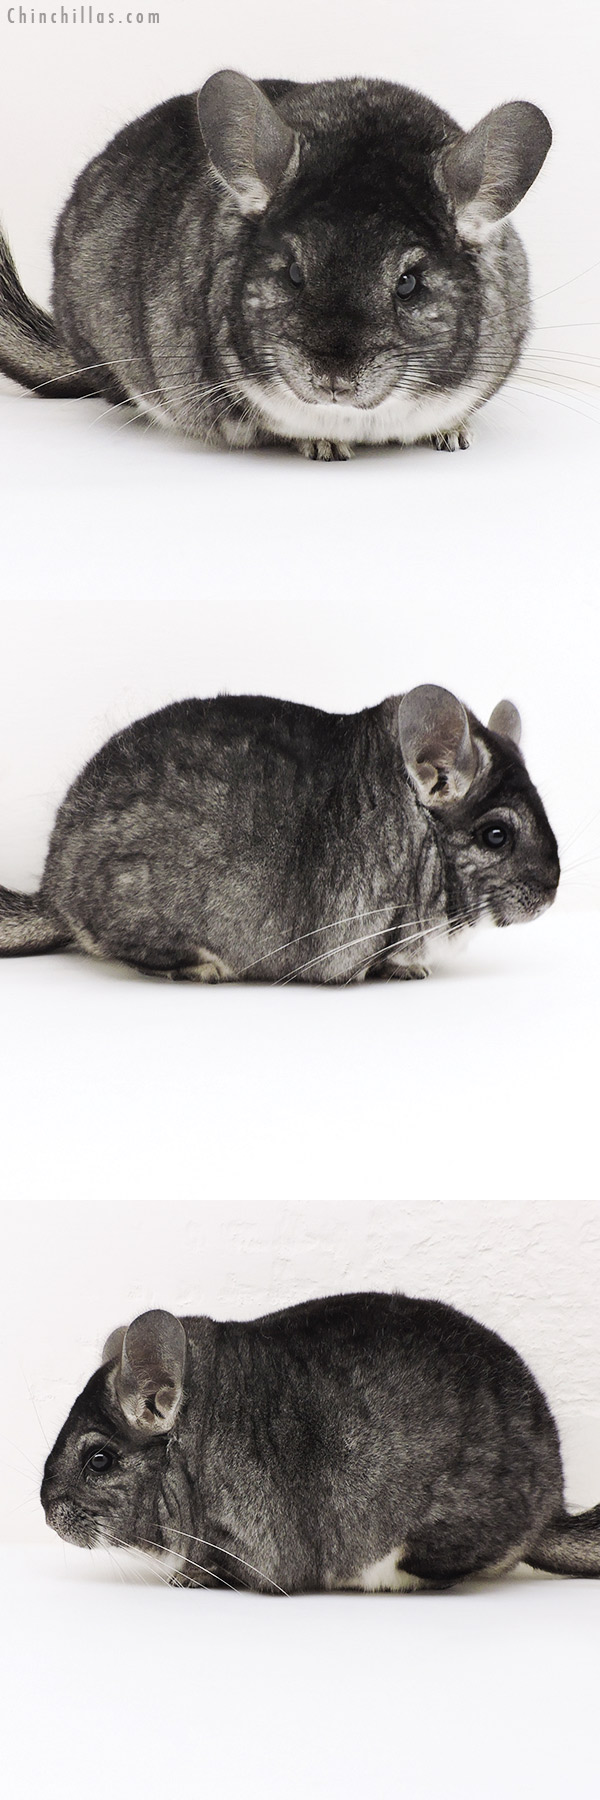 Chinchilla or related item offered for sale or export on Chinchillas.com - 17166 Premium Production Quality Standard Female Chinchilla